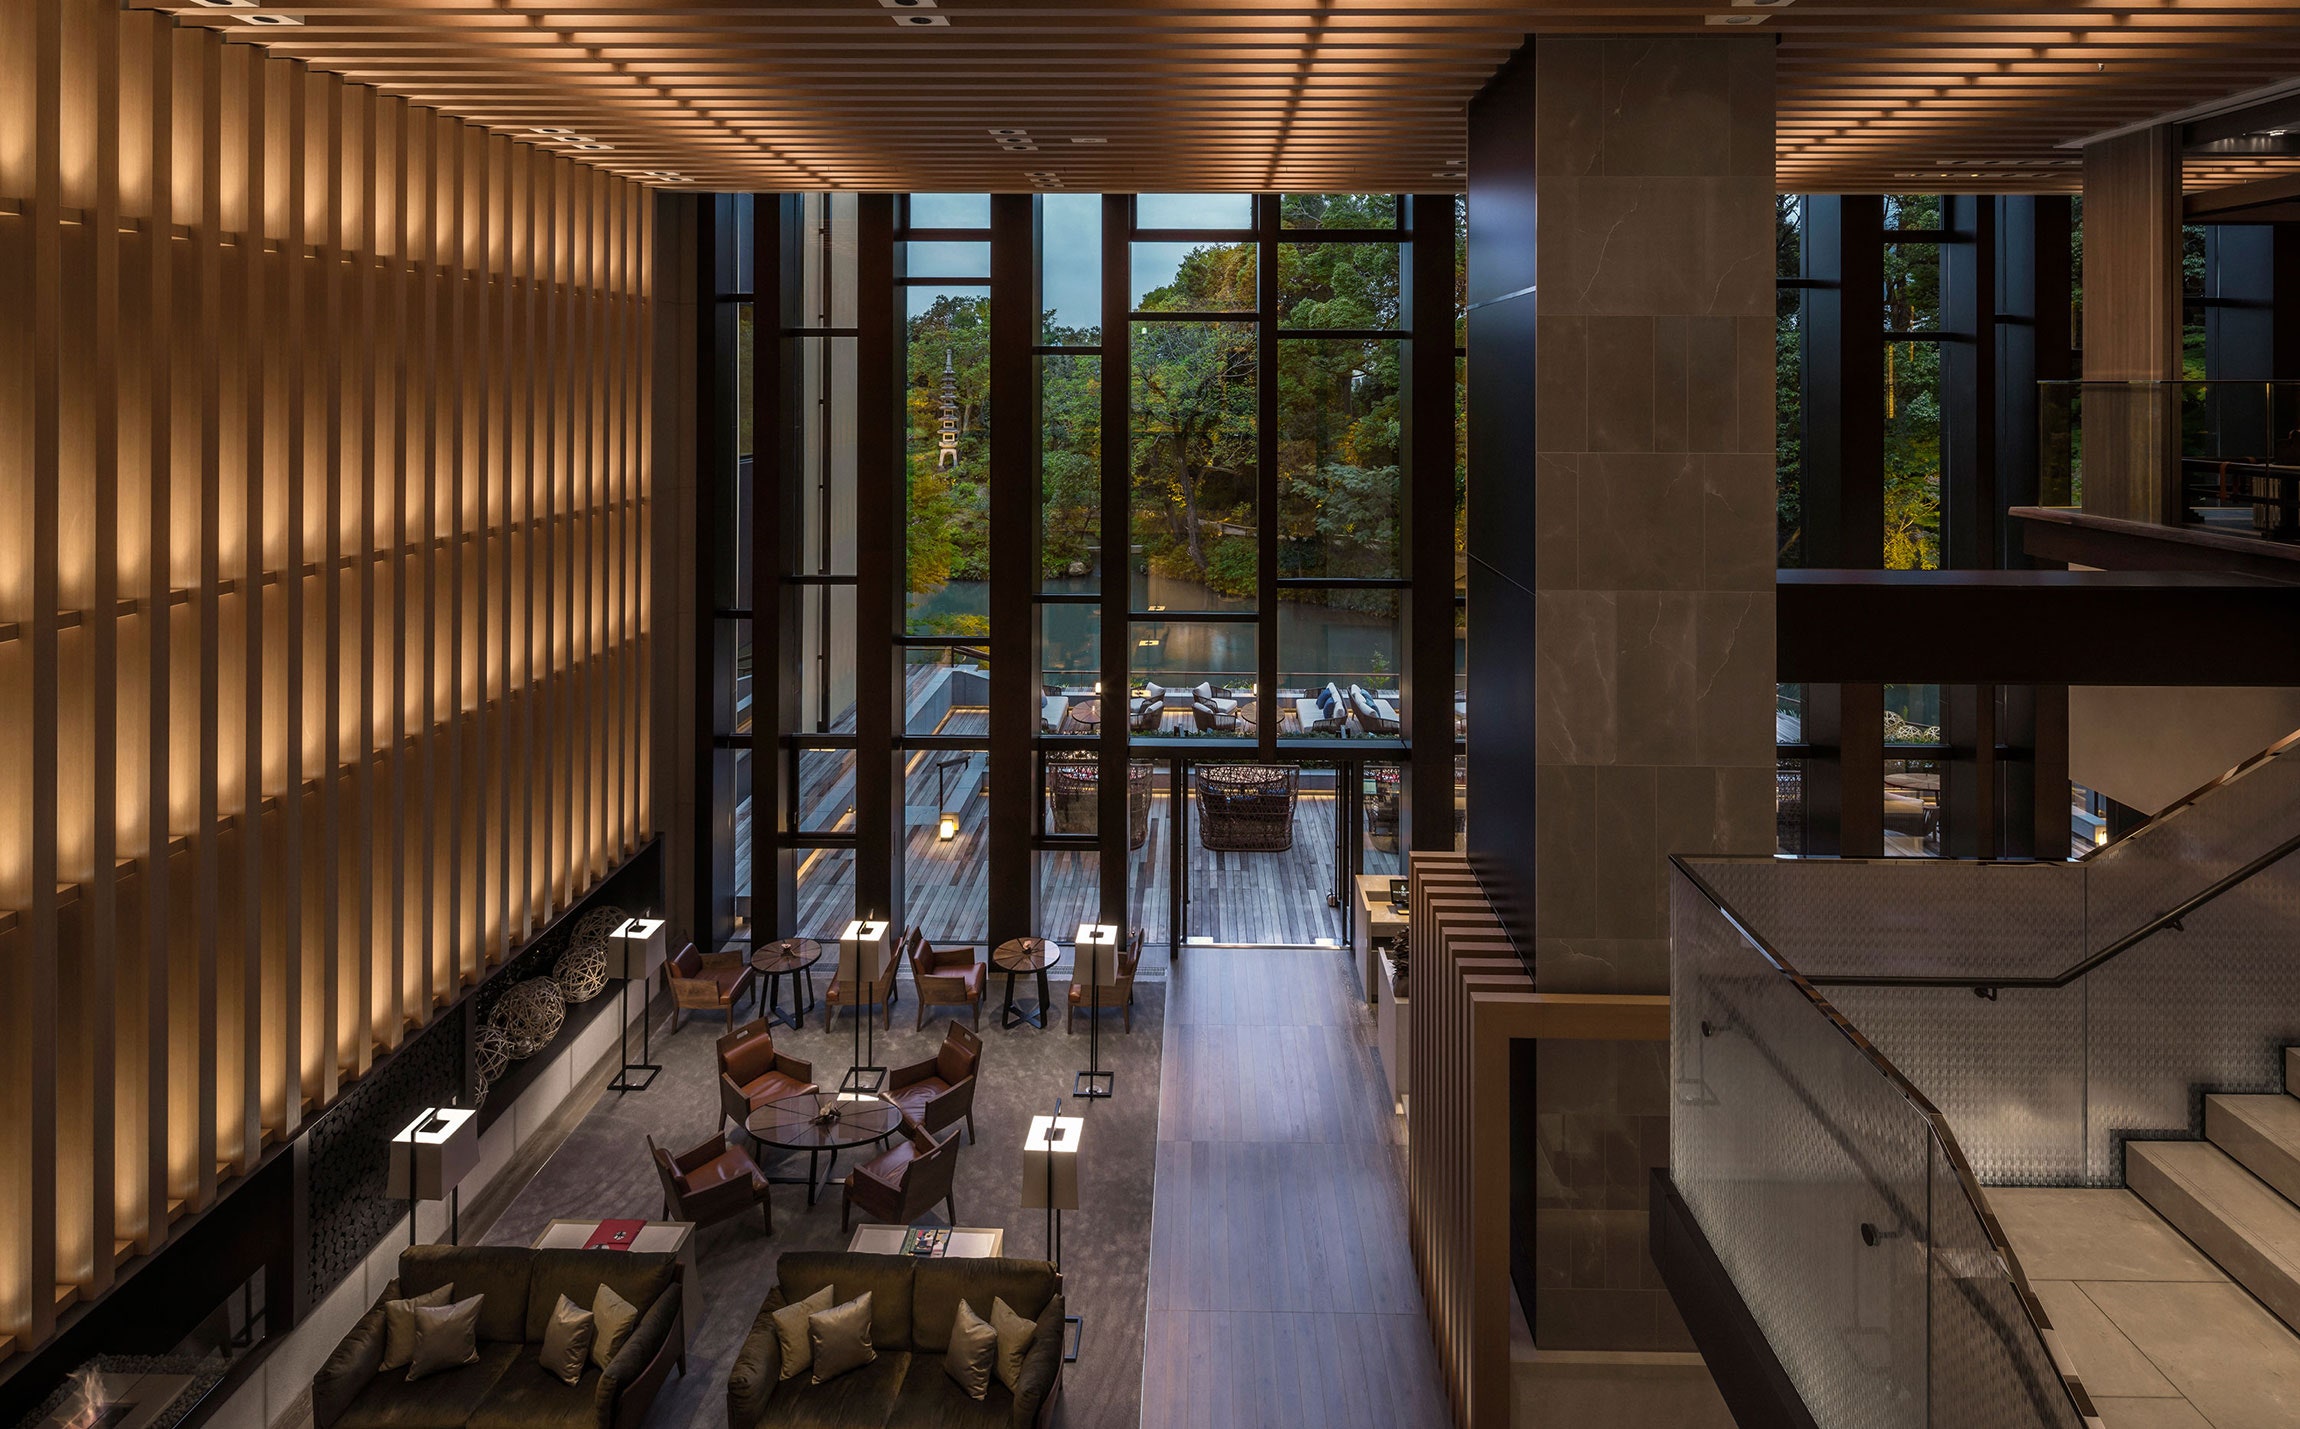 <p>At the <a href="https://www.fourseasons.com/kyoto/">Four Seasons Hotel Kyoto</a>, you’ll know it’s going to be something special as soon as your cab turns into the bamboo-lined brick road leading to the hotel. The crown jewel of the property is its 800-year-old pond garden, which evokes a feeling of serenity and is the perfect setting for alfresco dining when the weather is balmy. Enjoy the magnificent 65-foot indoor pool, French cuisine highlighting local ingredients at the property’s restaurant Brasserie, and a trip to the soothing spa.</p> <p><a href="https://cna.st/affiliate-link/m1C6KgLs7ft5zqFwHyhZvYgsvdzq4UfoV8aJjBduFBe5EbwHkQSmLBKNsbSjEi1SSUumE7dpAqFuXYQycYXD3bLqG4YamgNYWxcarciRdt67SbSeBw9UkZSNfyEAEHMgxBBASLvfAtLR5xT3tby9iWiPSGgmSStkKzyyPkm3ab4pqLNCPZDzJVqSthQ12xym32S37j82RRU1bwcLVsNjf1E1NqMTYTWyNq2hZcWxRLYPBAgFfe3148CXyxciaEPv4tkPcZLUEsXj579jgP4rstreFk9KhmEQc2dCLZQ7oMME41R7KBV16Xm65ndBrfwNKYCSqoGrrr9WowJCberZ8jv3B4LtU9tfhR5AQxBypdVmiY6jrvGHV1nwsZj5v4UqASn42nii1WyaLewvK7ZtP4iXkfBiCt4A21rzKRVcazqNrPdfRhFVpmVKukw8VLSmv3YFwvxBRmVLfb49ikxWdQZmwbLRxVgD8ycqcBGZiNrYJSquAKAacGMogSLFMkYxKTzE5J4MeQY898q1u7RmxQZ" rel="sponsored"><em>Book now</em></a>.</p><p>Sign up for our newsletter to get the latest in design, decorating, celebrity style, shopping, and more.</p><a href="https://www.architecturaldigest.com/newsletter/subscribe?sourceCode=msnsend">Sign Up Now</a>